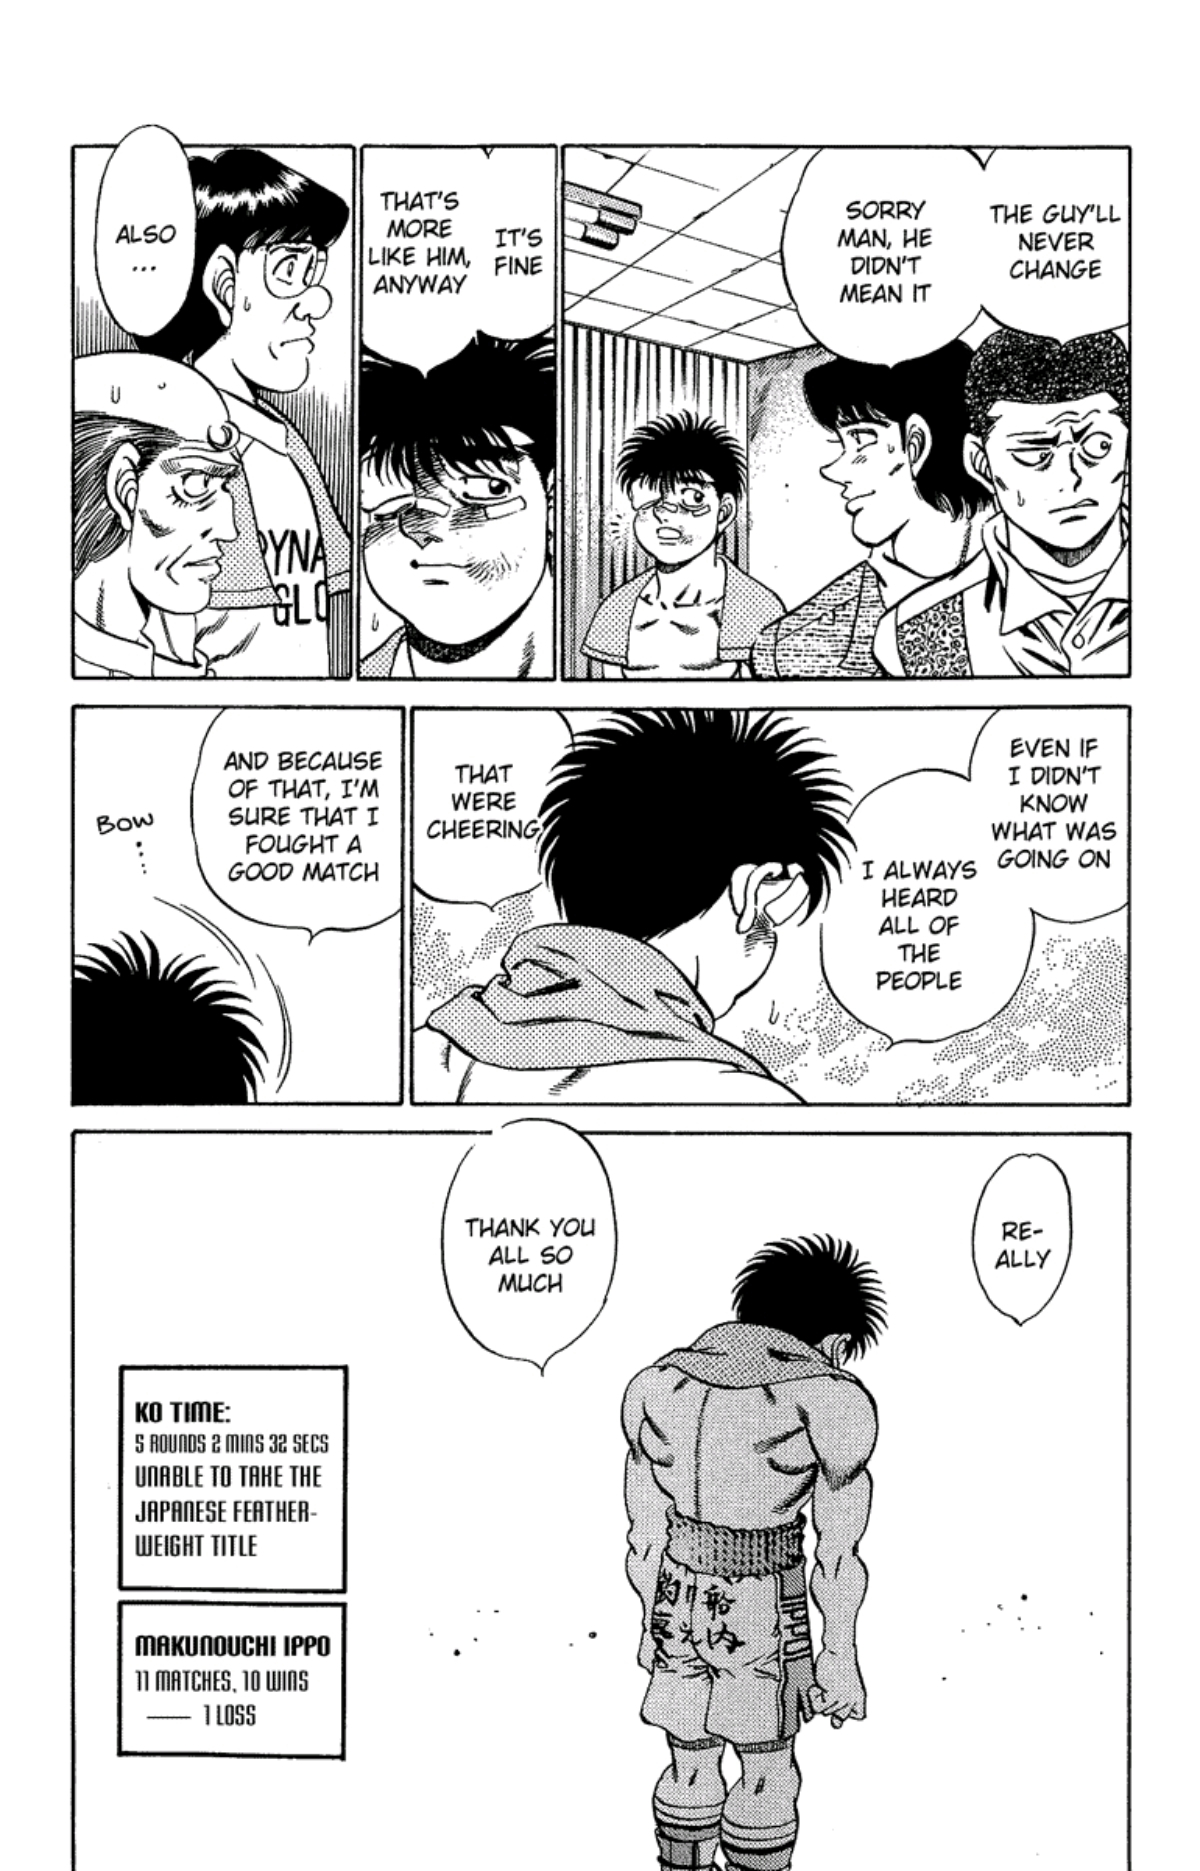 Ippo reflects that it must have been a good match since the growd was cheering. His record is 11 matches, 10 wins, 1 loss. 